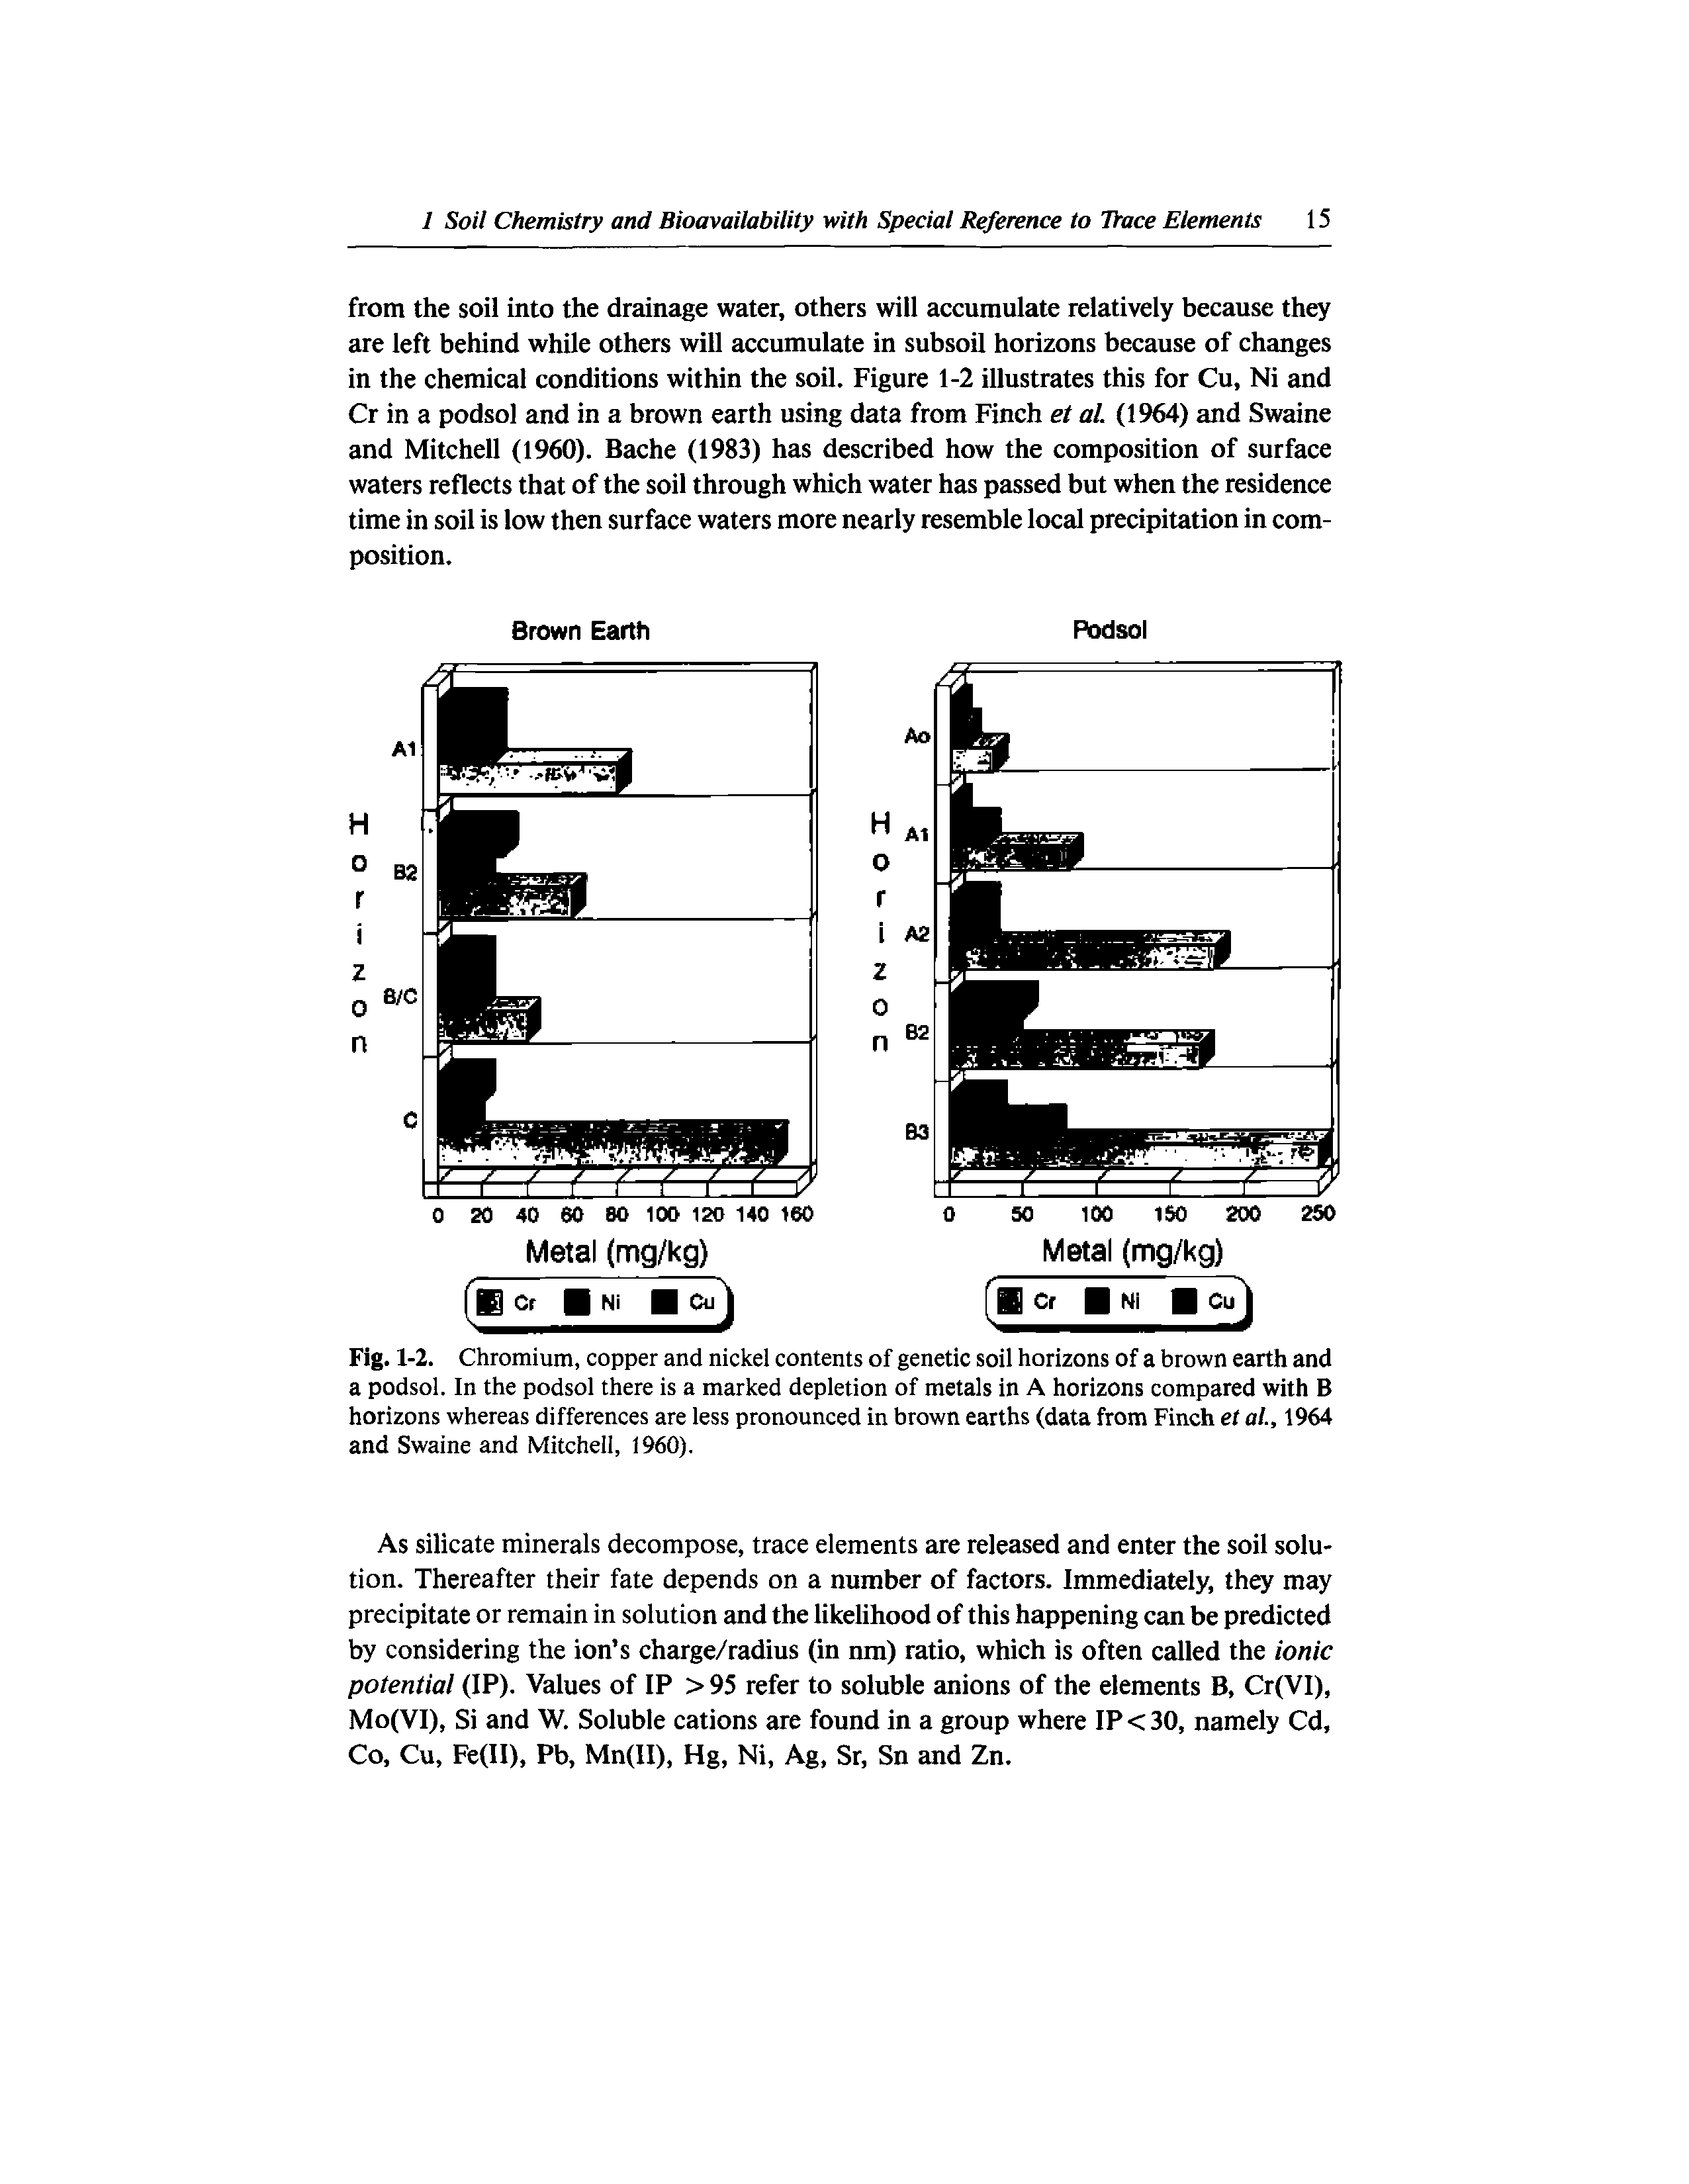 Fig. 1-2. Chromium, copper and nickel contents of genetic soil horizons of a brown earth and a podsol. In the podsol there is a marked depletion of metals in A horizons compared with B horizons whereas differences are less pronounced in brown earths (data from Finch et al., 1964 and Swaine and Mitchell, 1960).